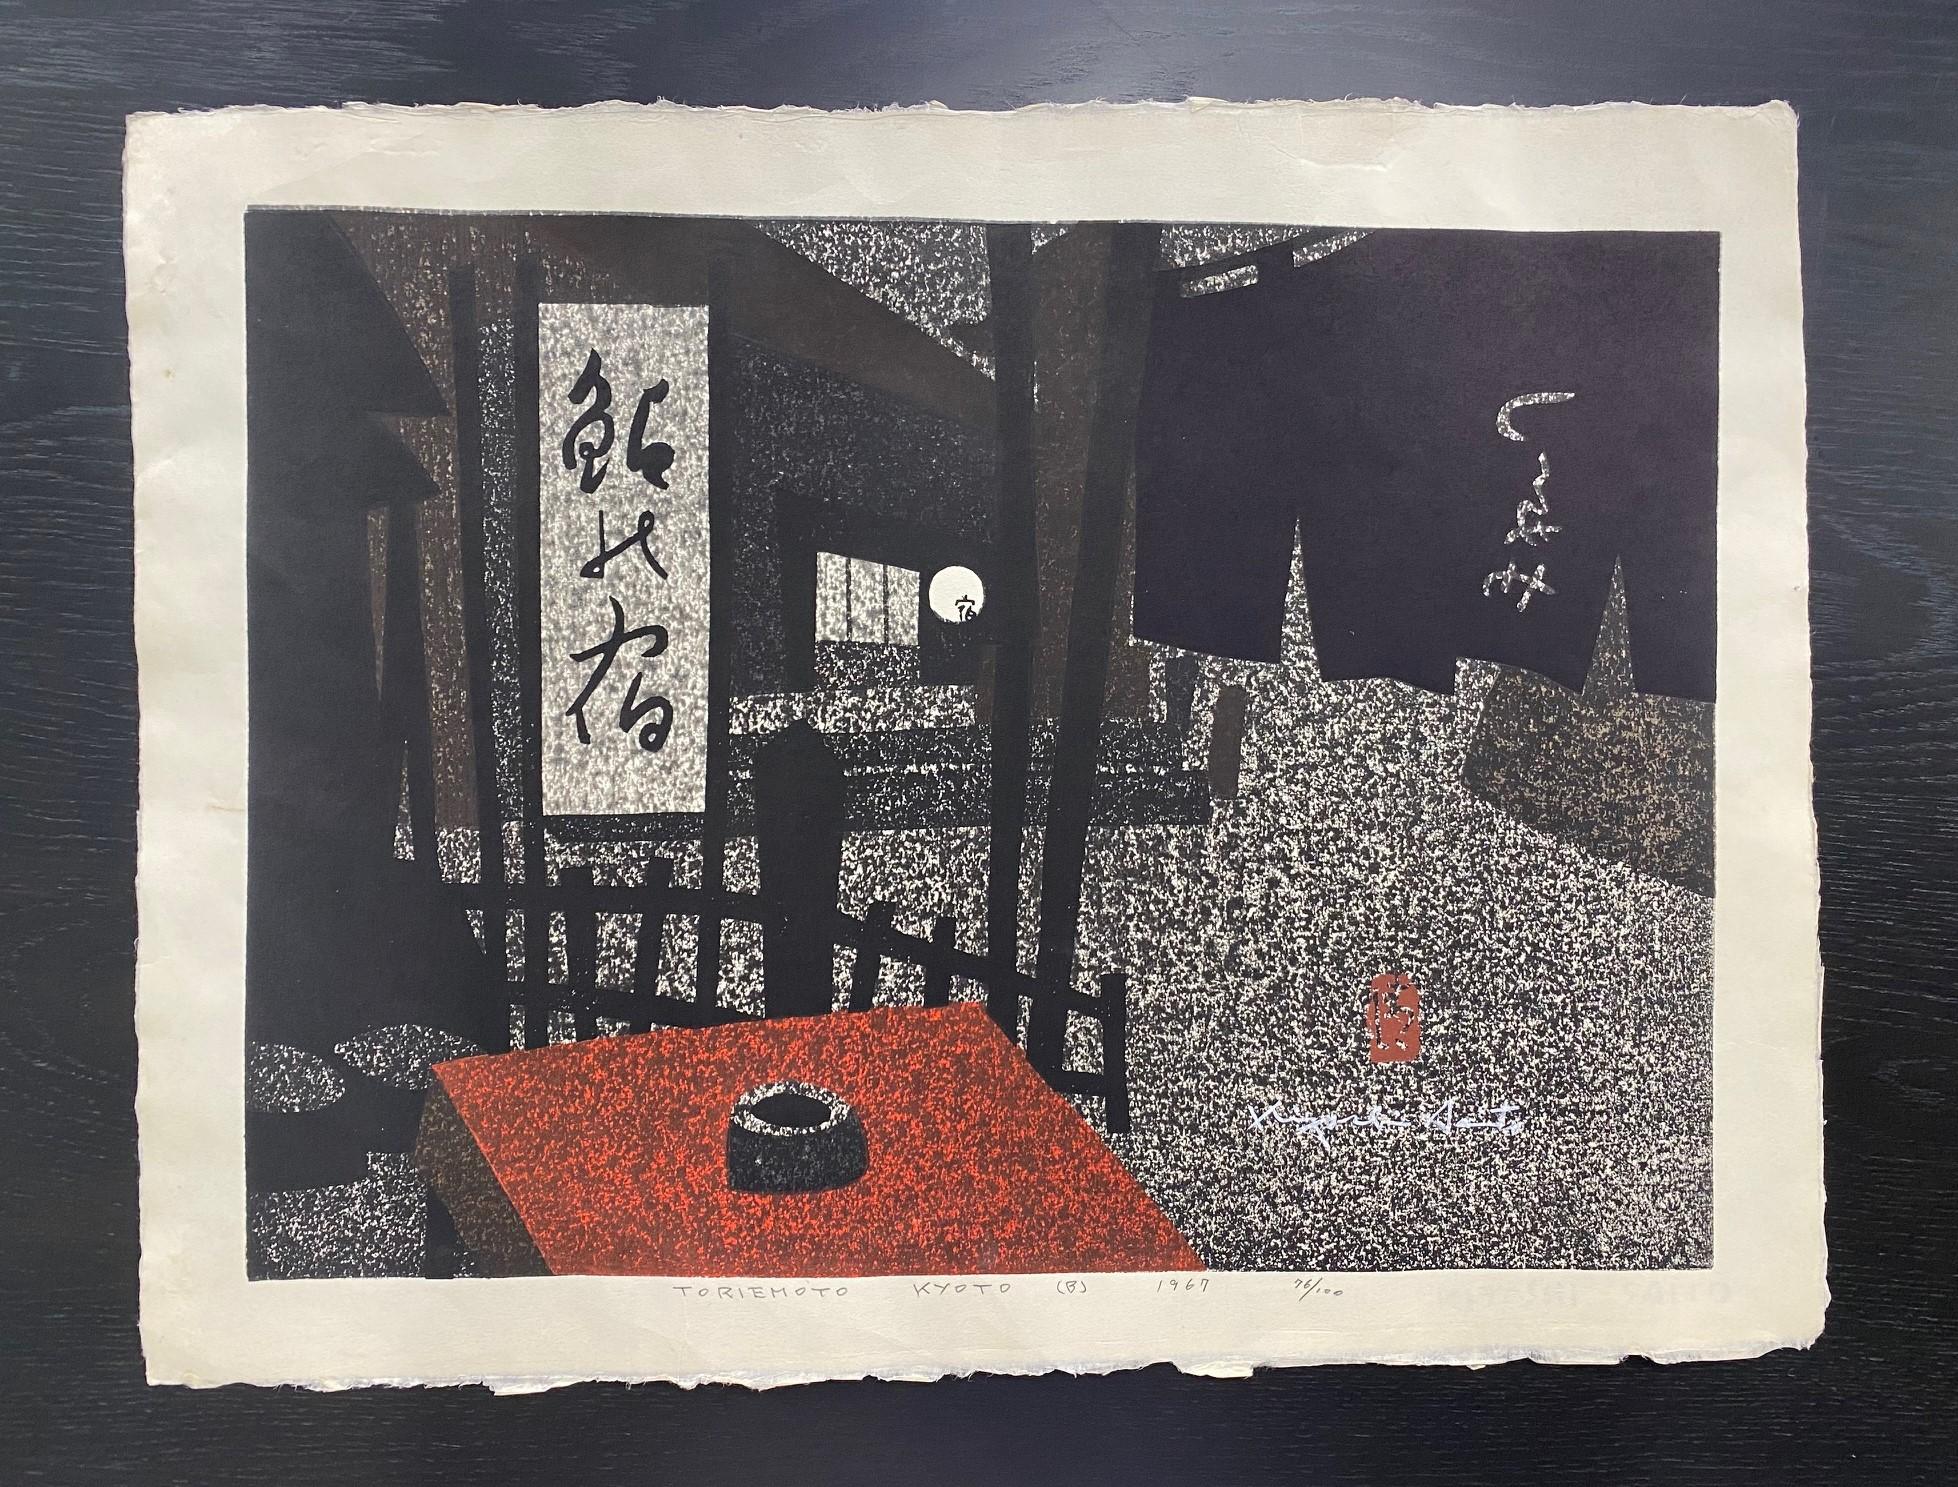 A beautifully and darkly composed woodblock print by famed Japanese printmaker Kiyoshi Saito. Many consider Saito to be one of the most important, if not the most important, contemporary Japanese printmakers of the 20th century. This print, which is